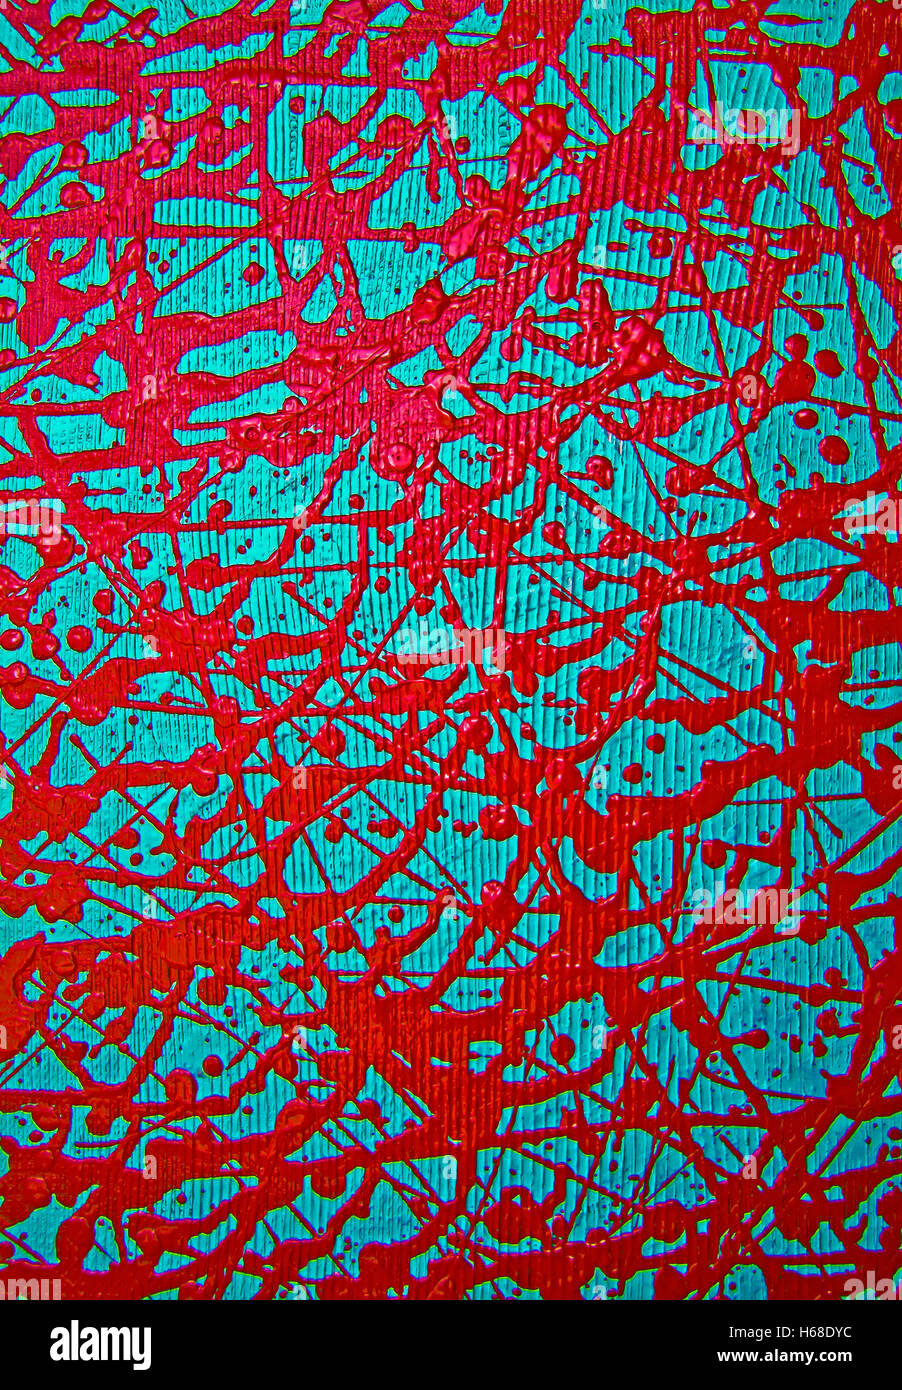 Red Paint Drips. Detail of painting in acrylic on canvas with the textural background. Stock Photo